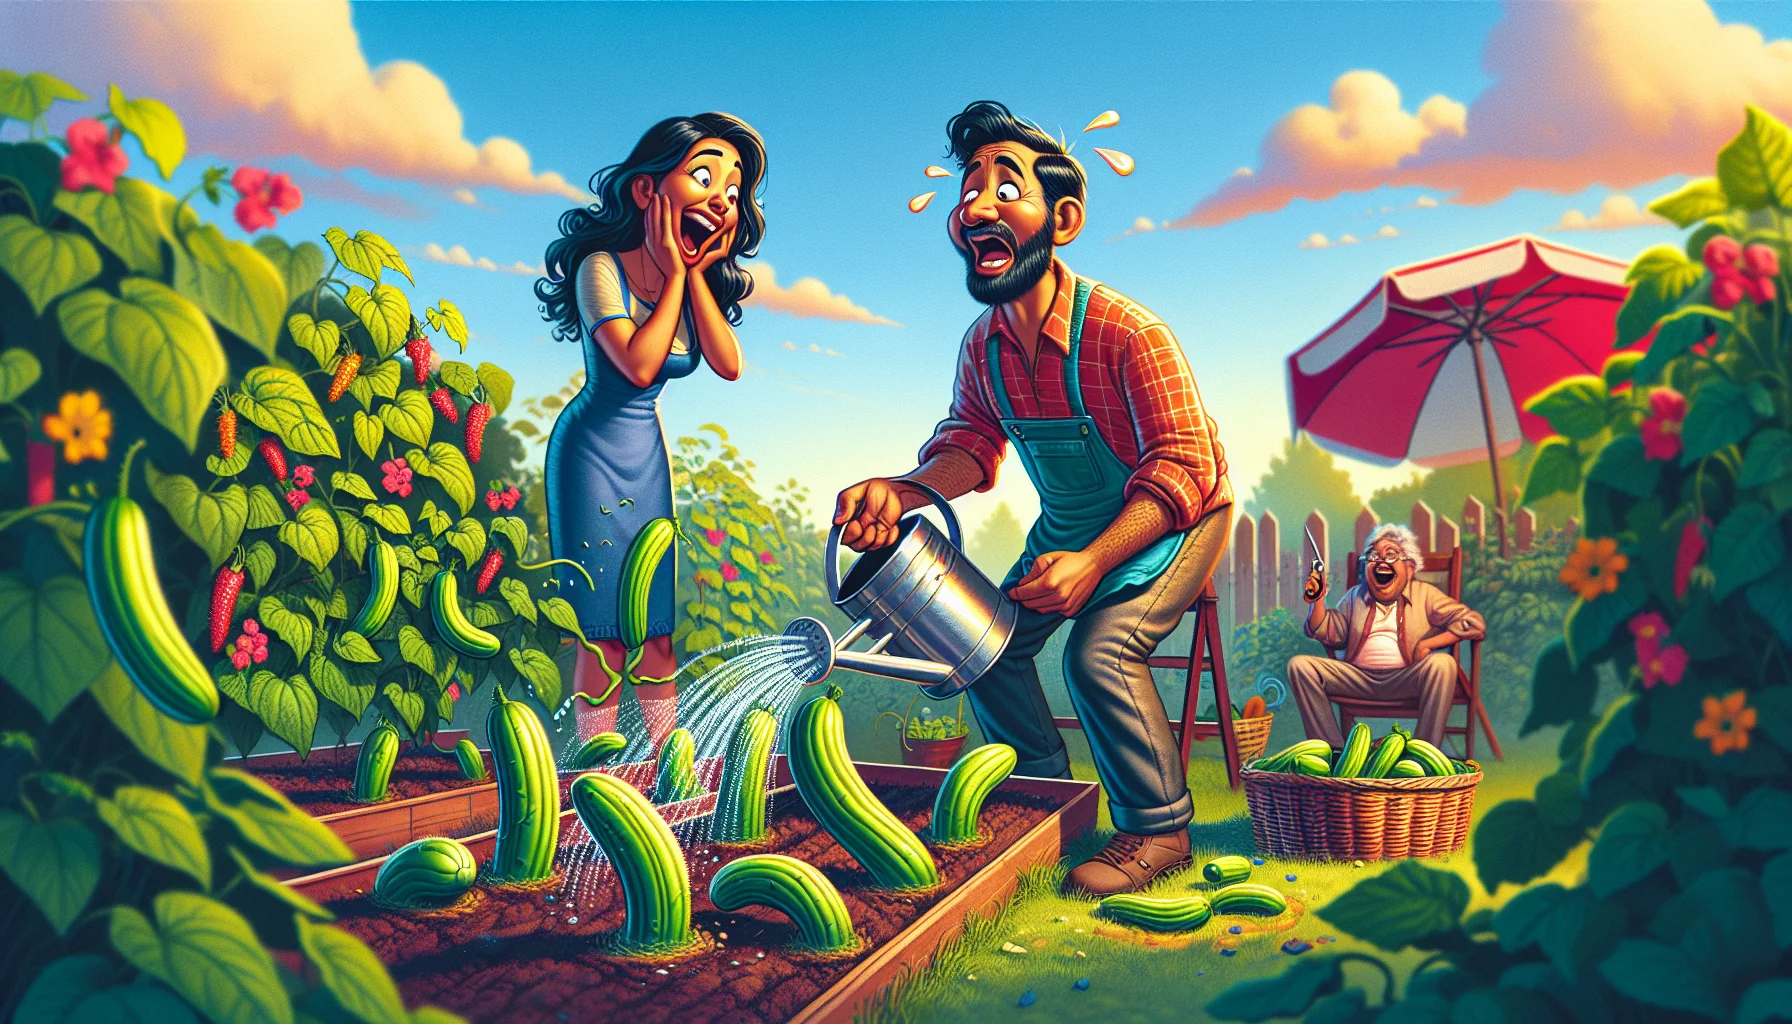 Imagine a whimsical and amusing scene set in a lush vegetable garden under a clear summer sky. In this scene, a man of South Asian descent and a woman of Hispanic descent are tending to their cucumber plants. The man, bewildered, holding a watering can, watches as the plants unexpectedly grow at a hilarious speed. Next to him, the woman laughs heartily at the situation, holding a basket of already harvested cucumbers. This colorful and lively image captures the joy and quirks of gardening, making it an enticing activity.